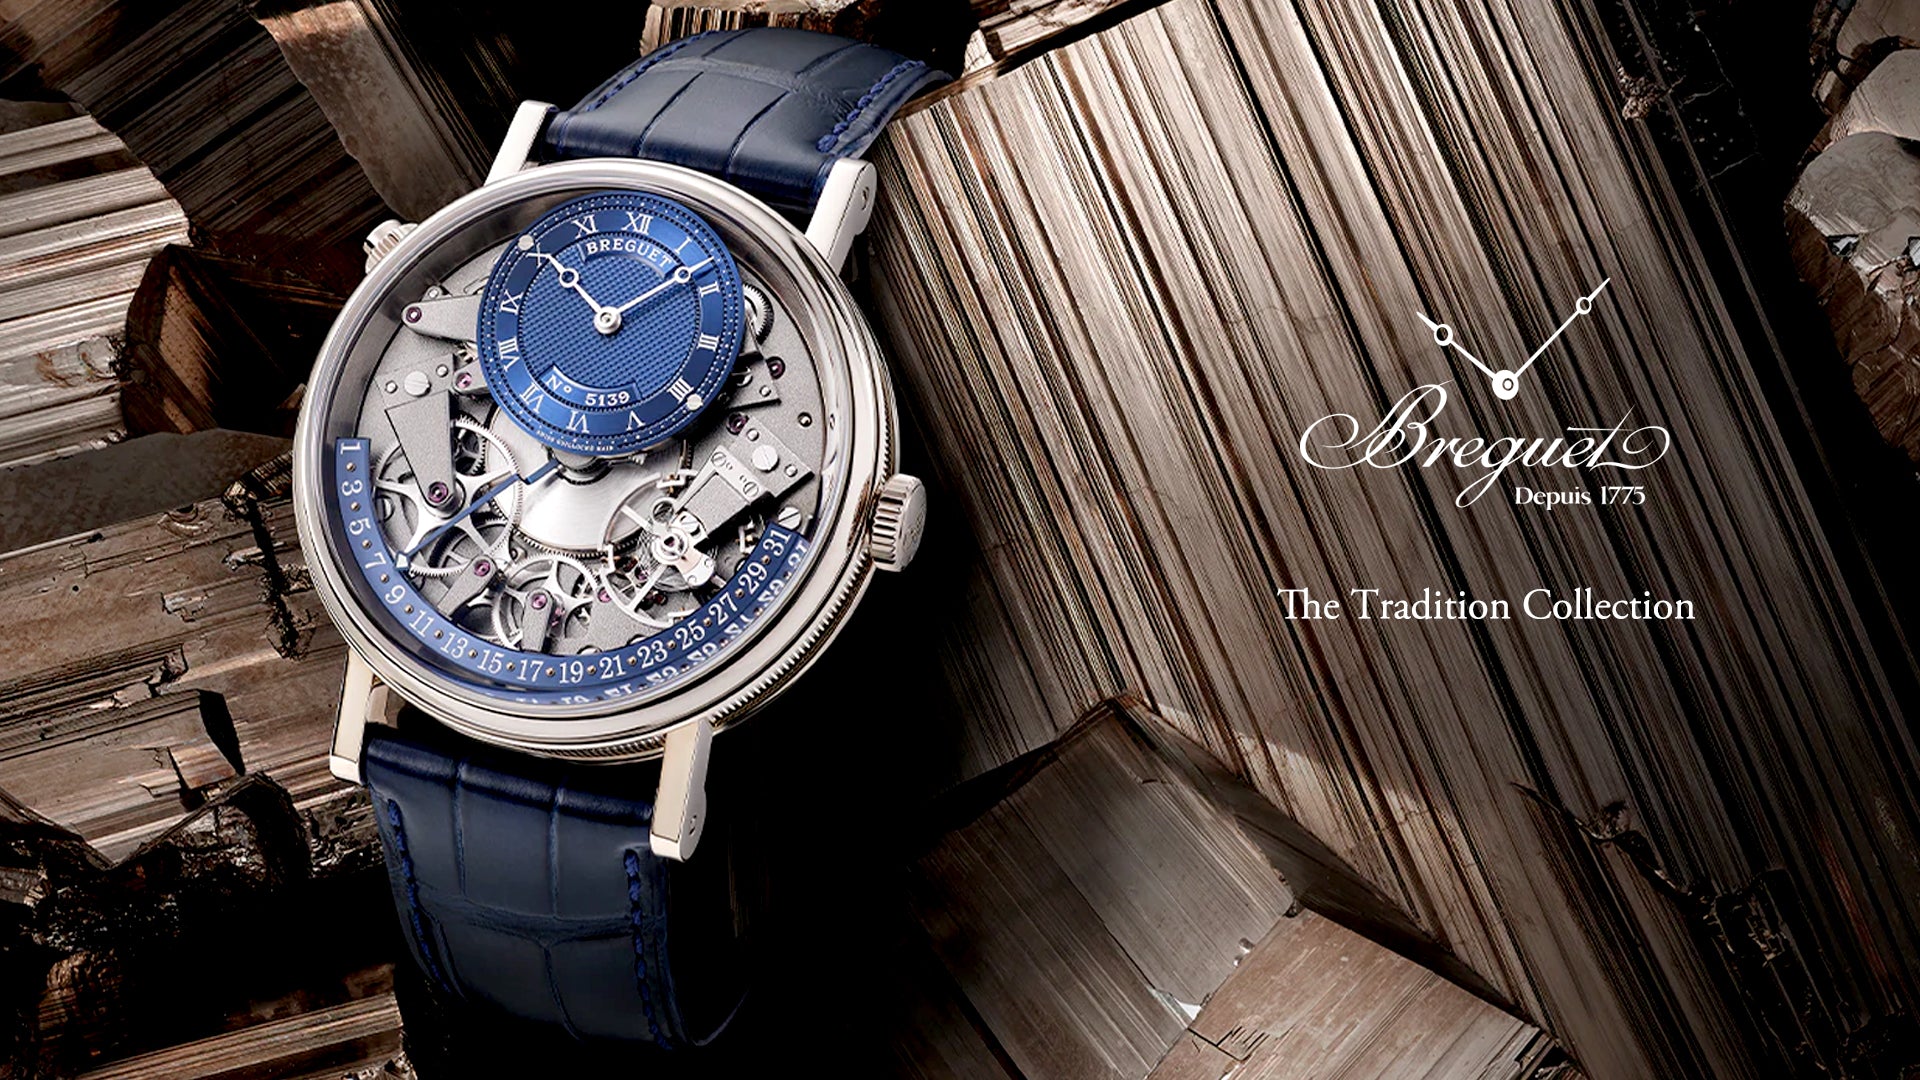 Breguet the traditional collection